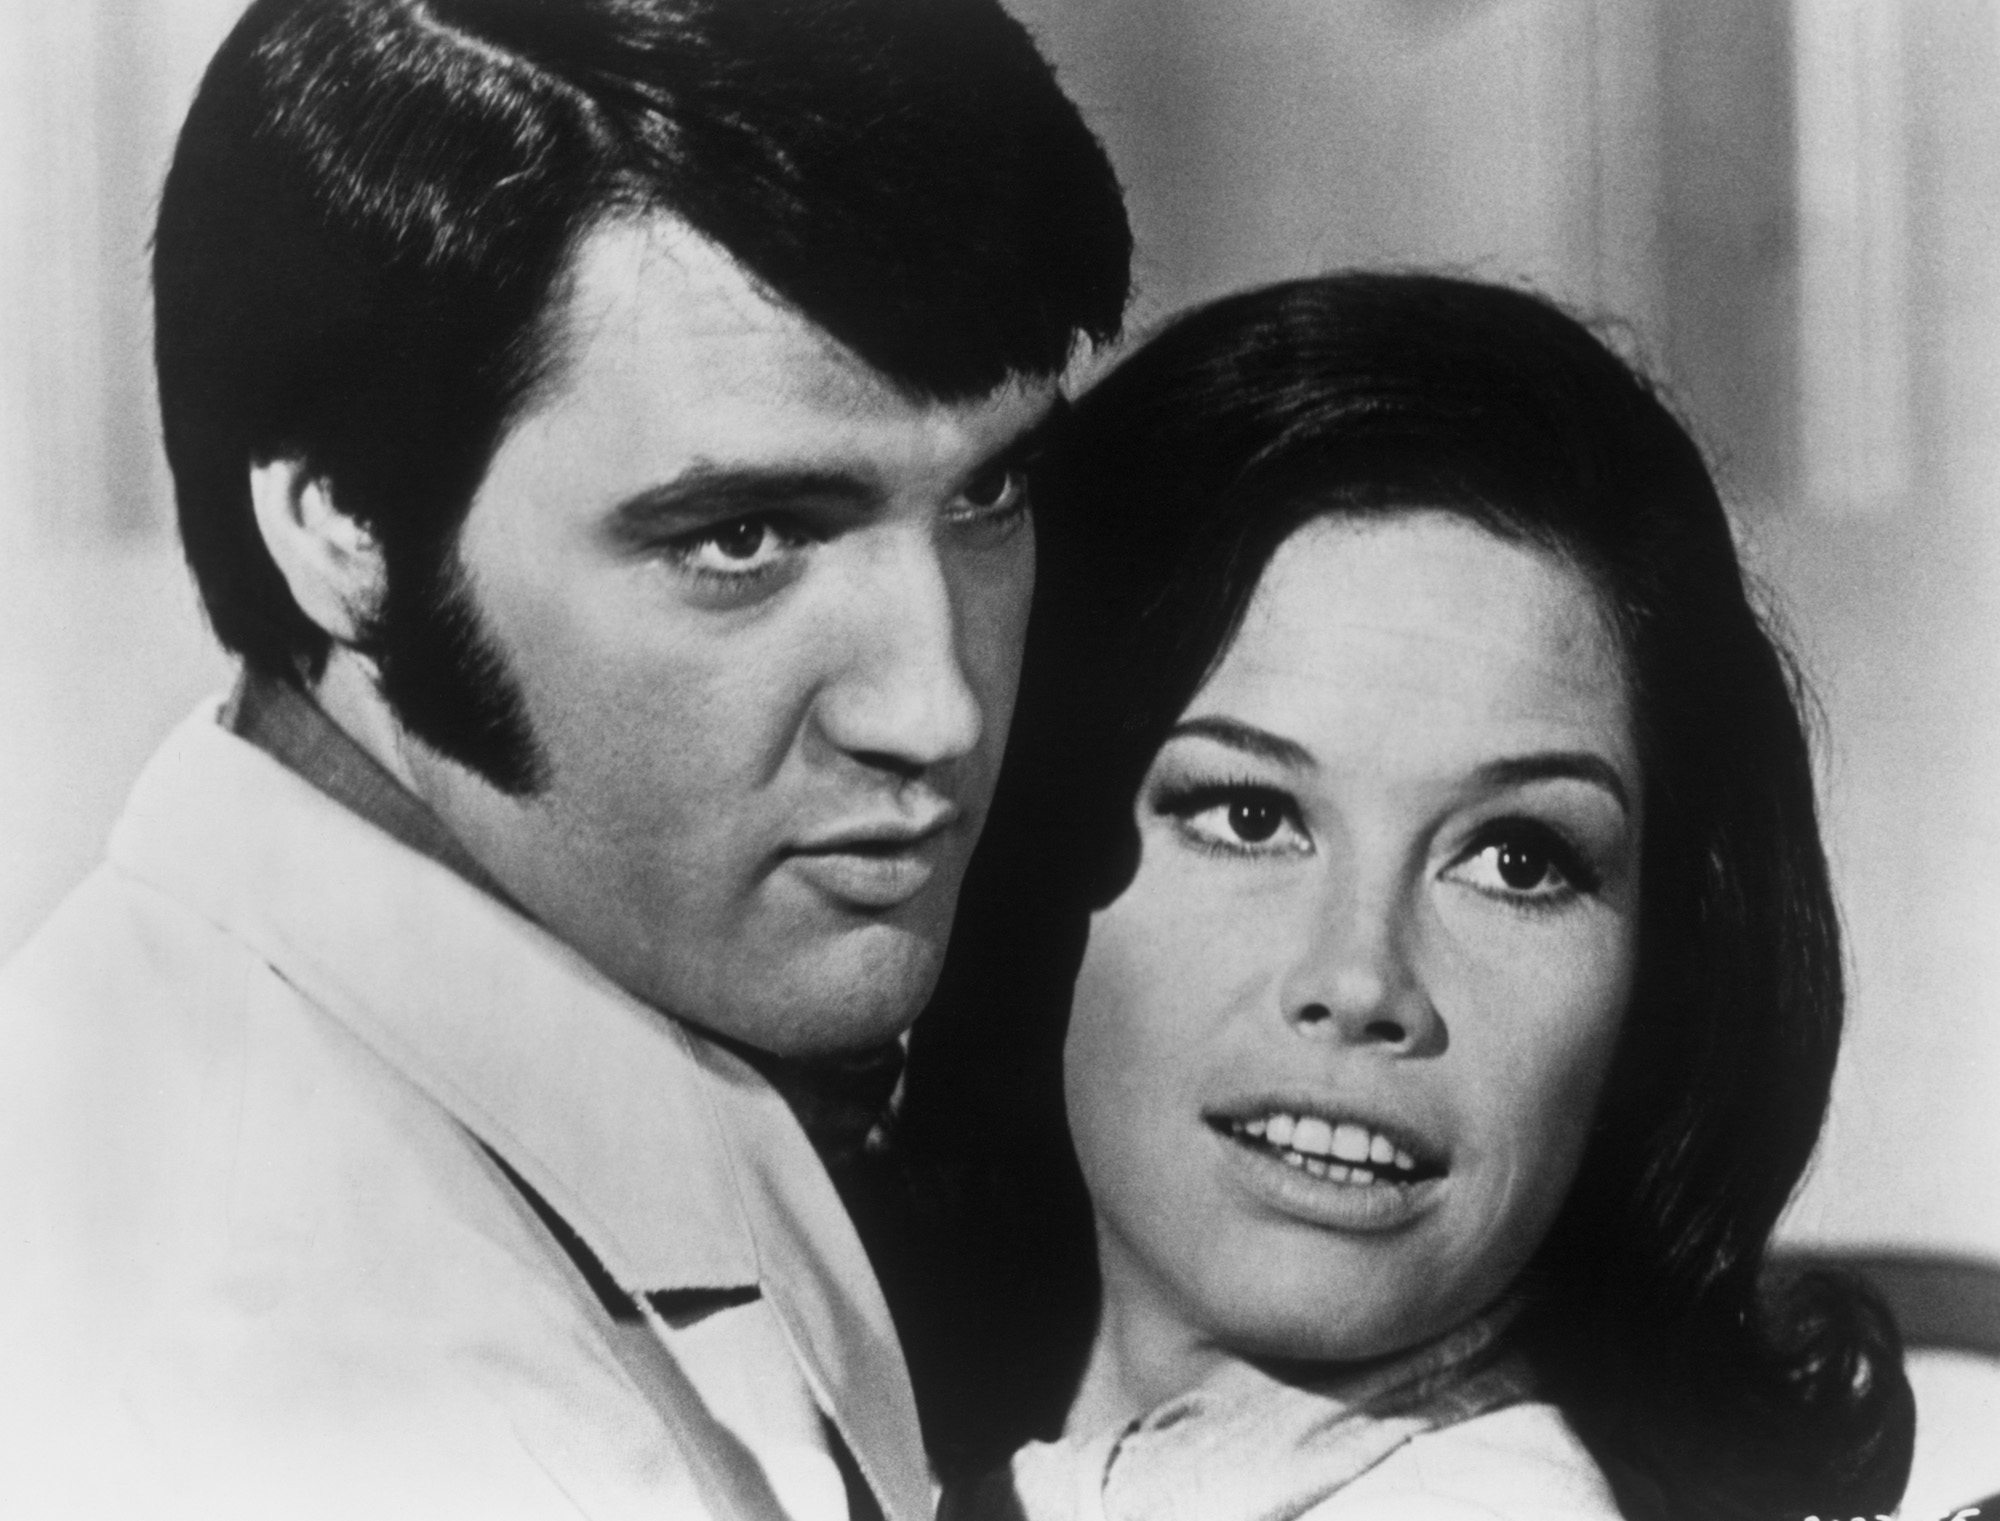 Elvis Presley and Mary Tyler Moore